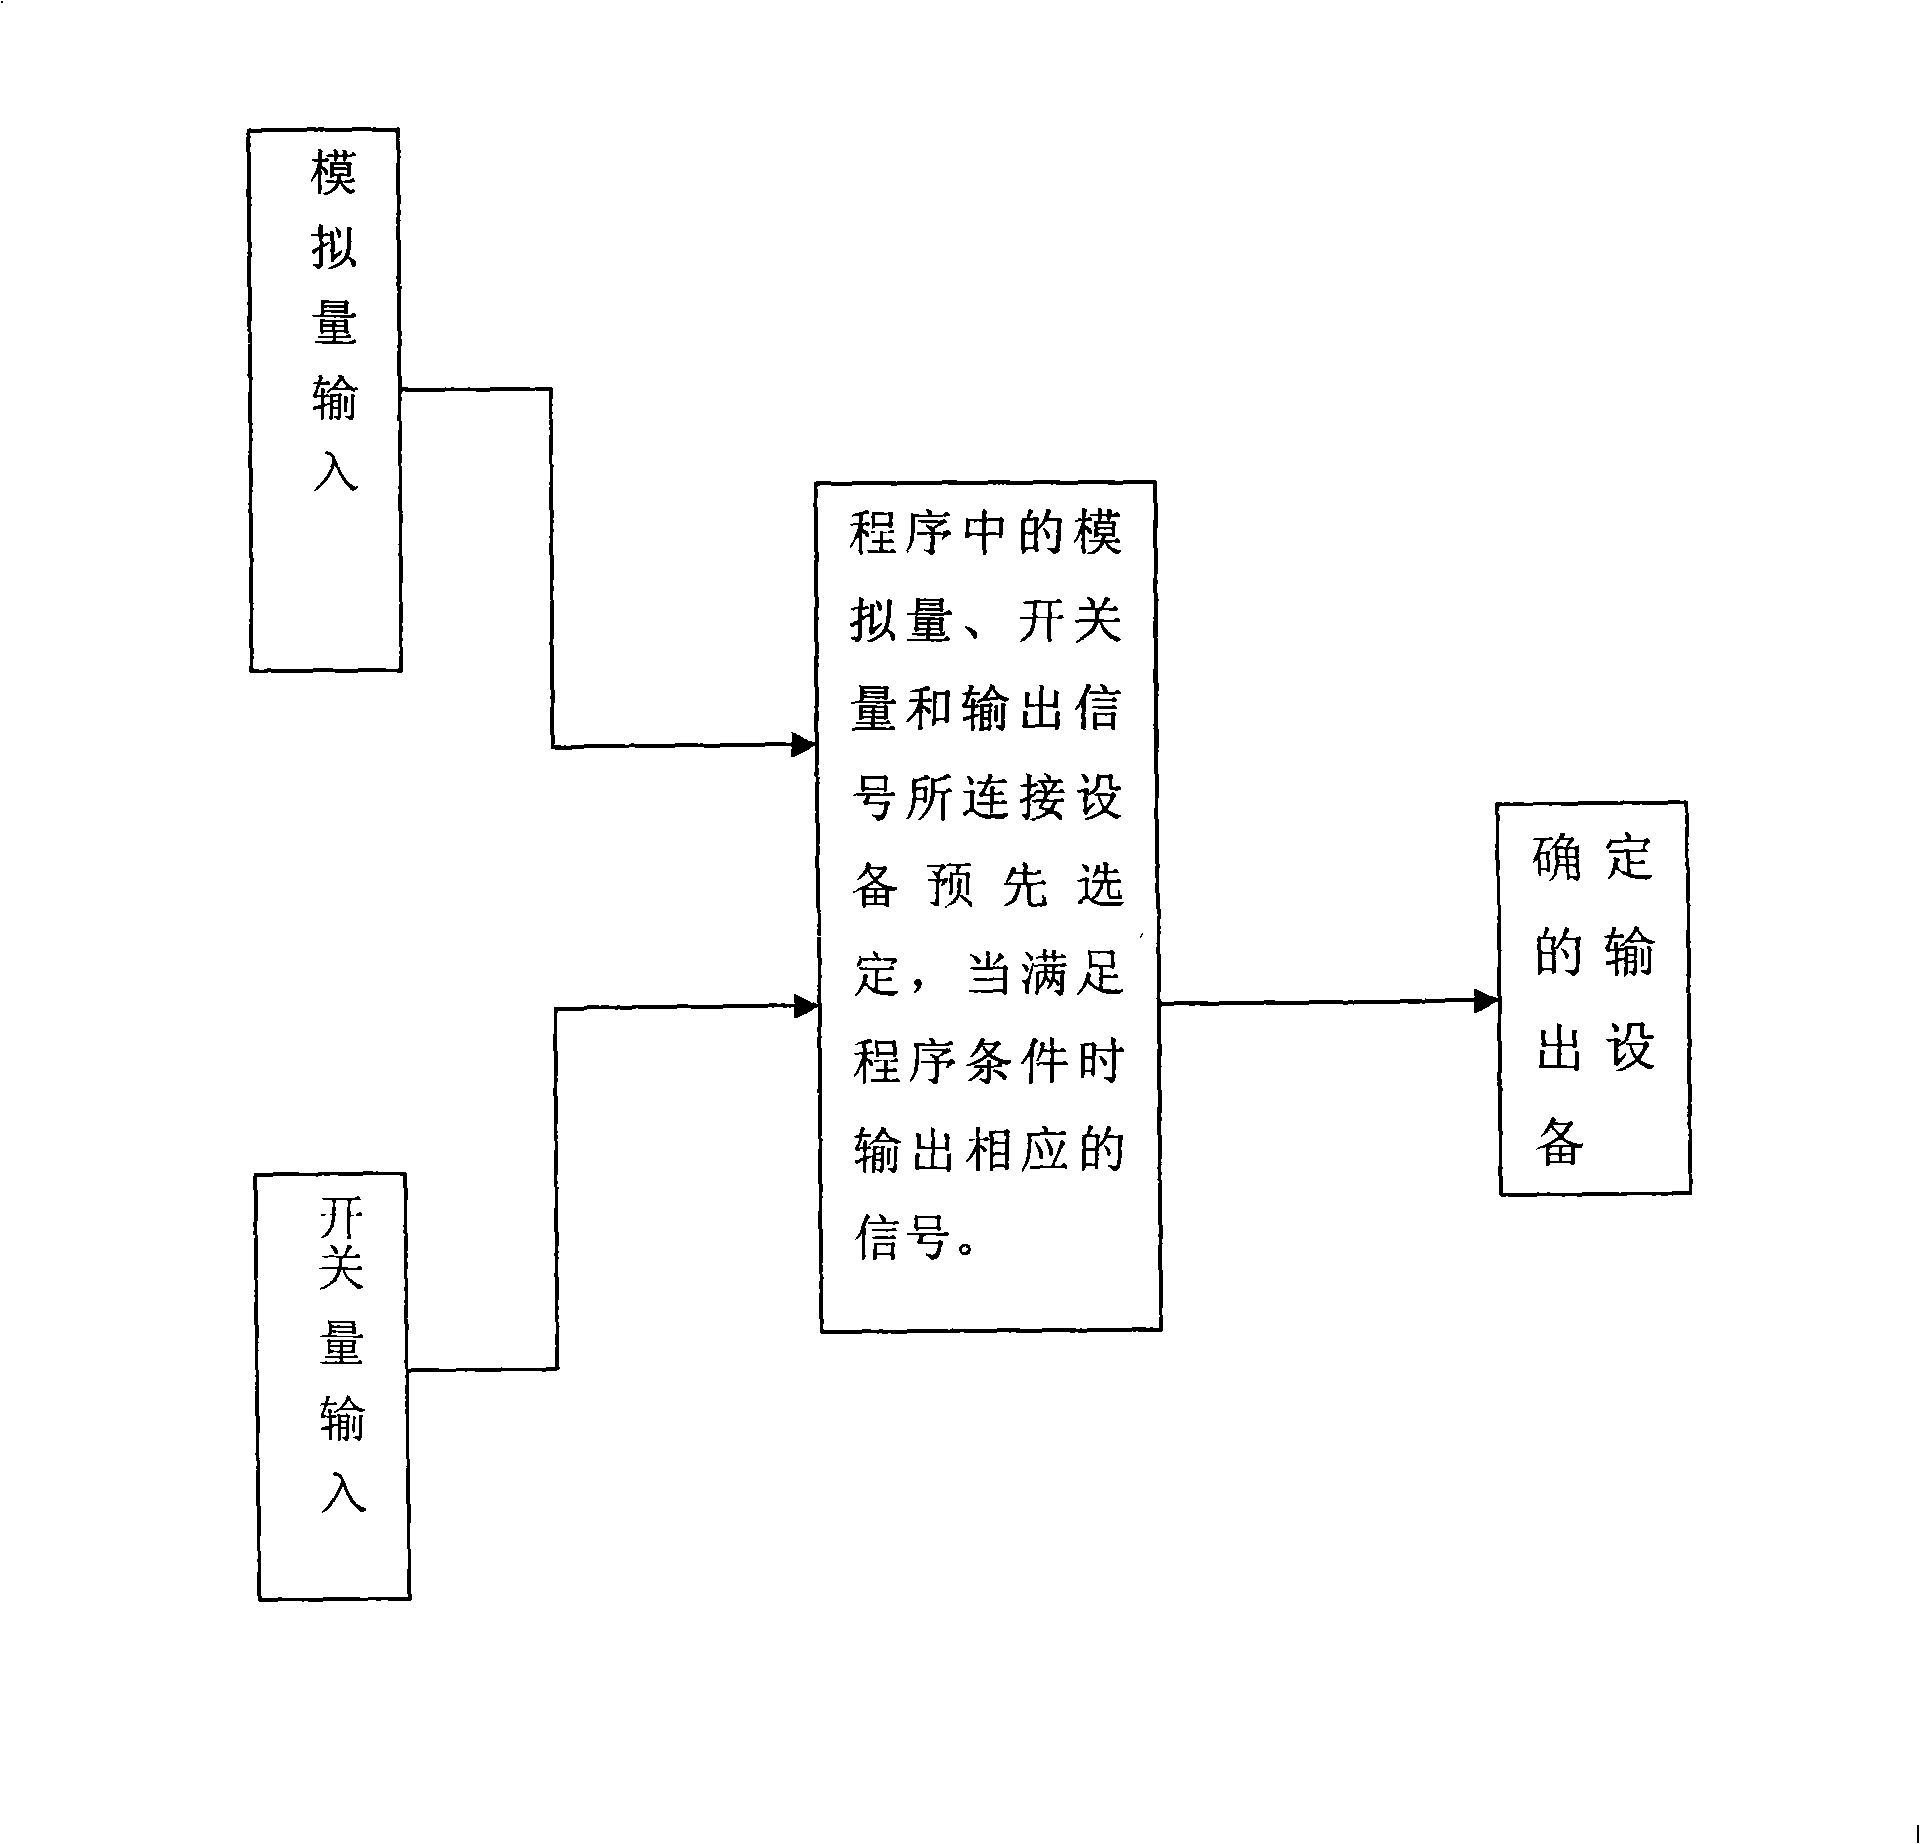 Programmable control method of microcomputer complex protection device